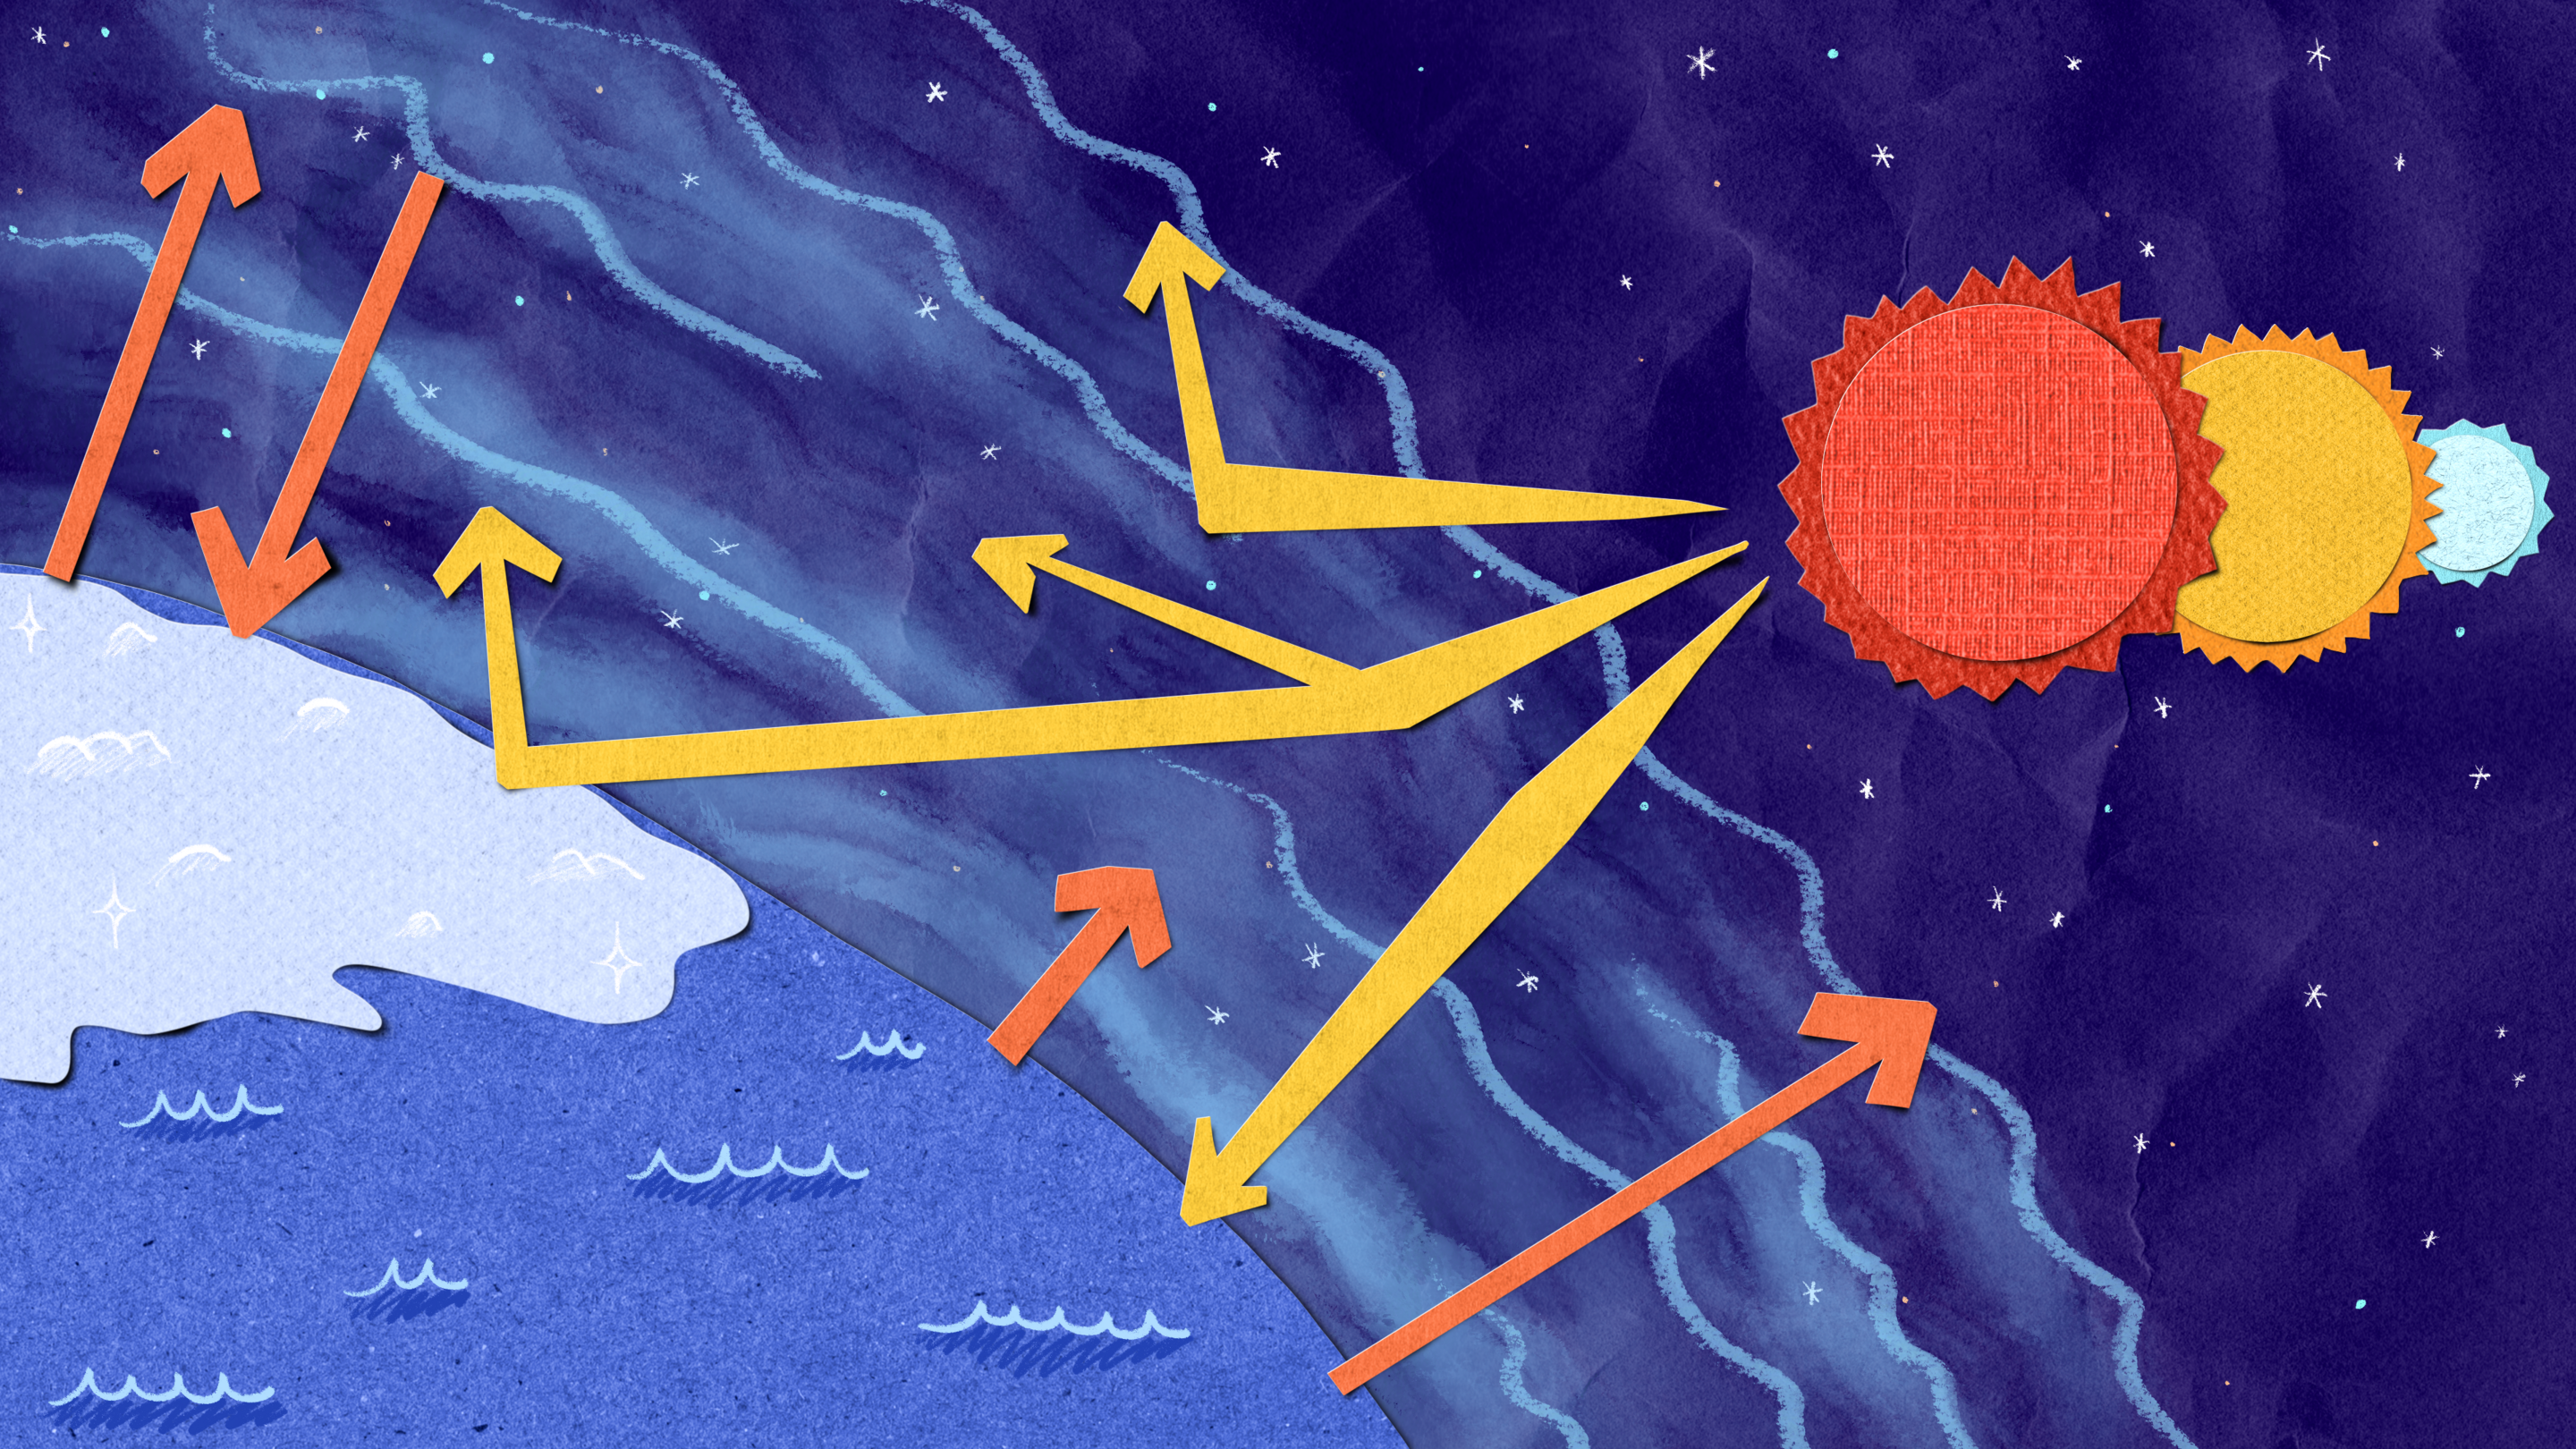 Astronomy Literature Illustration for the Shields Paper